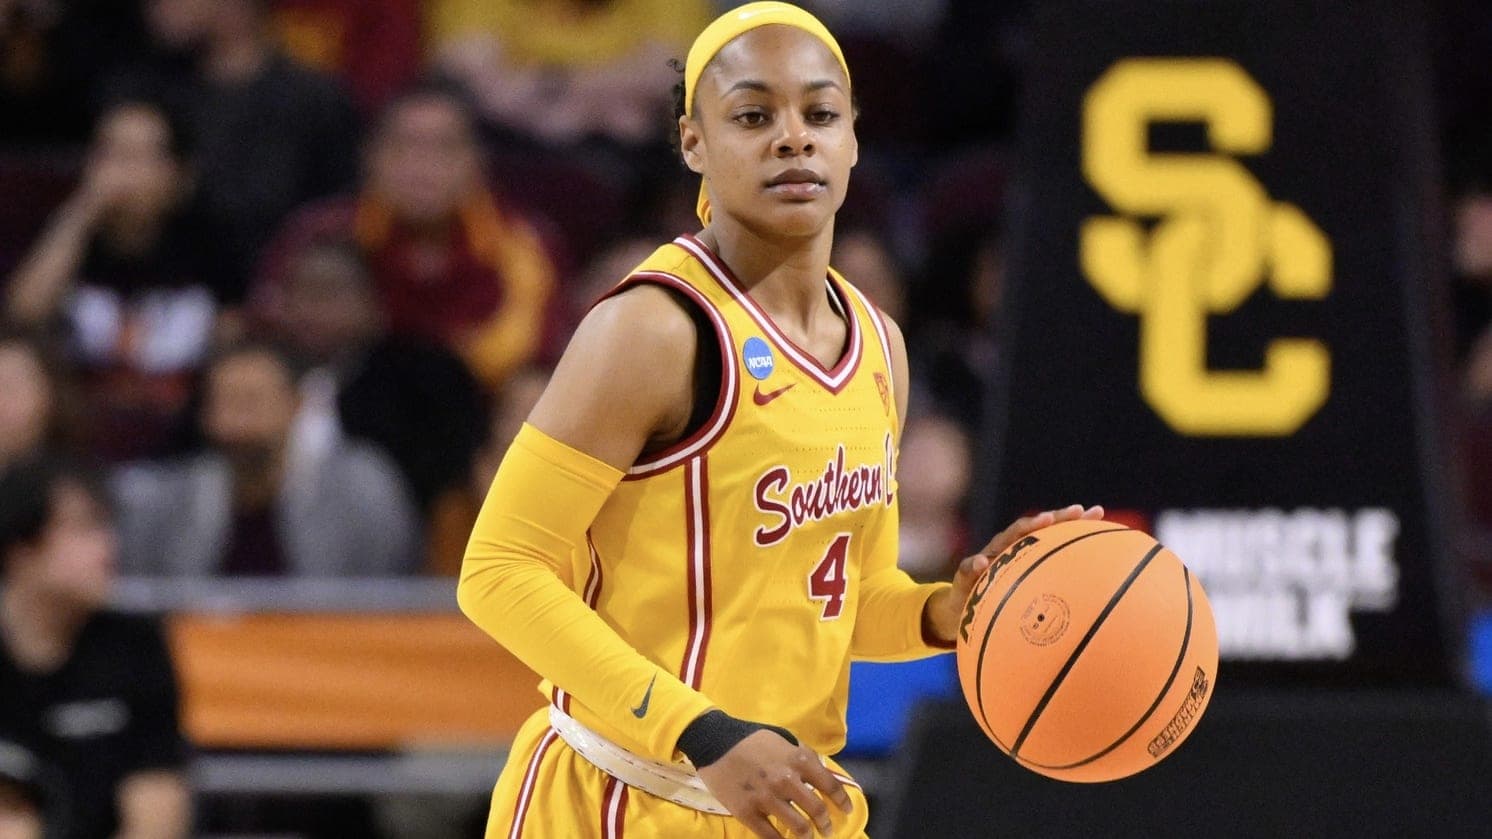 Cal women’s basketball adds veteran guard Kayla Williams from USC – Sports Illustrated